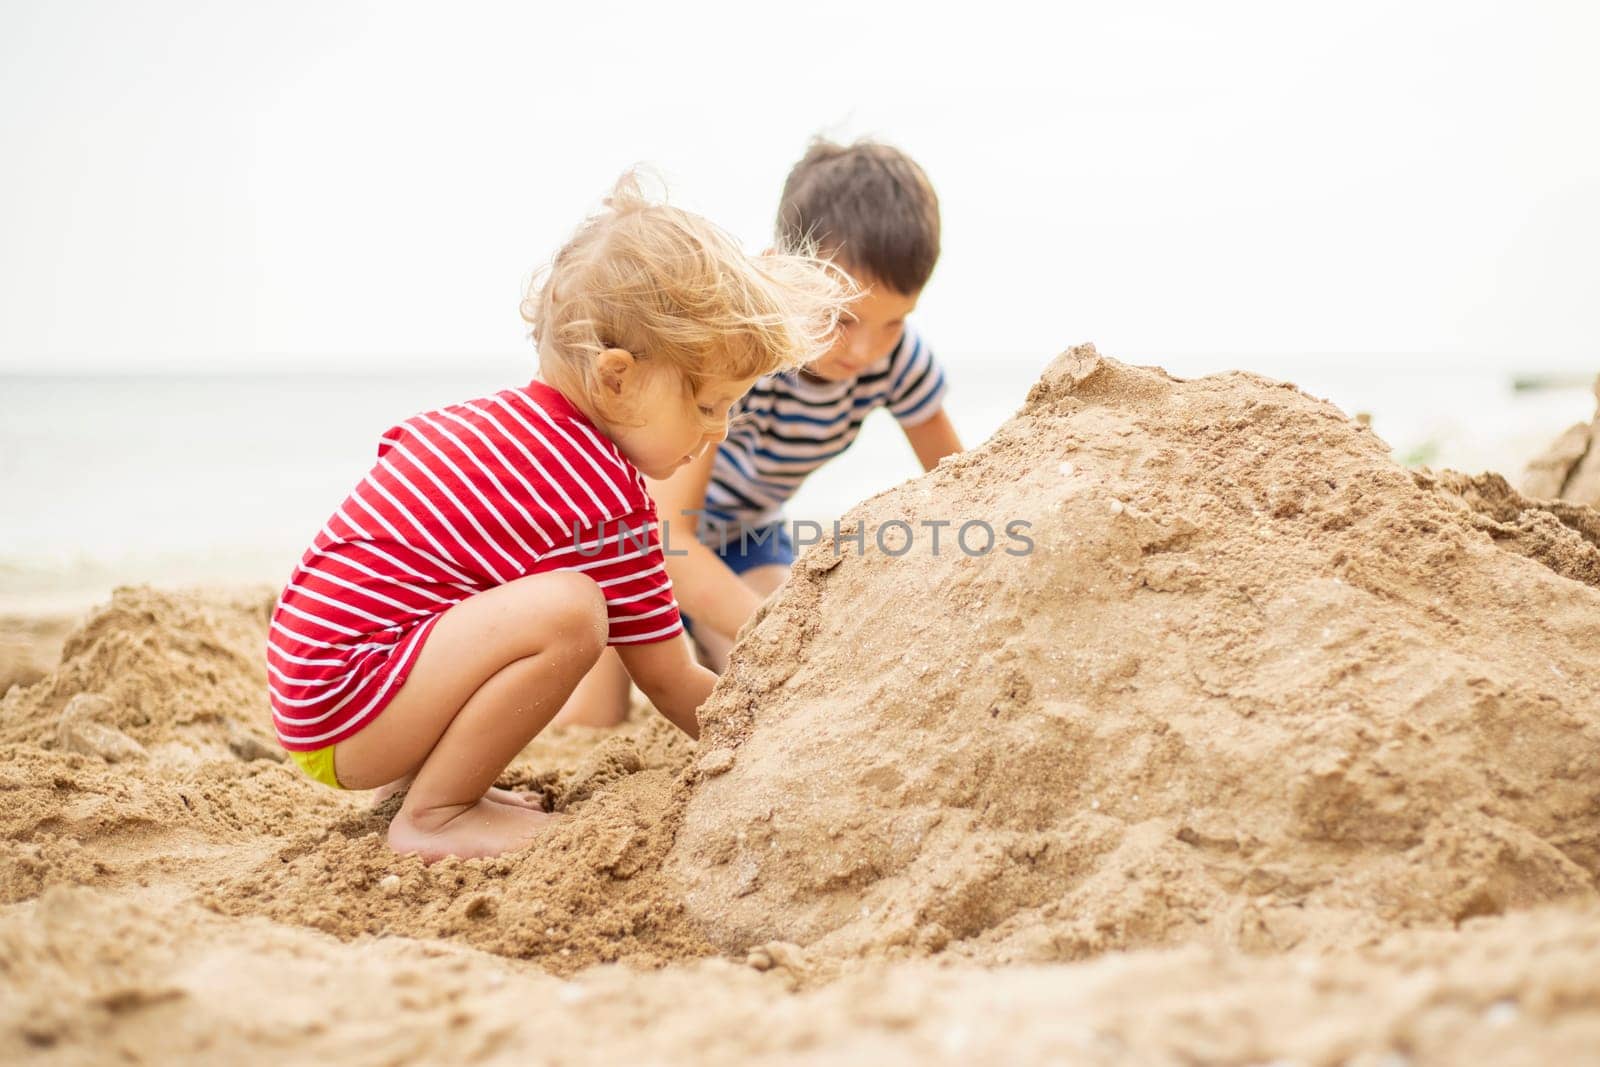 Two little boys playing on sandy beach. Cute kids building sandcastles on beach by andreyz